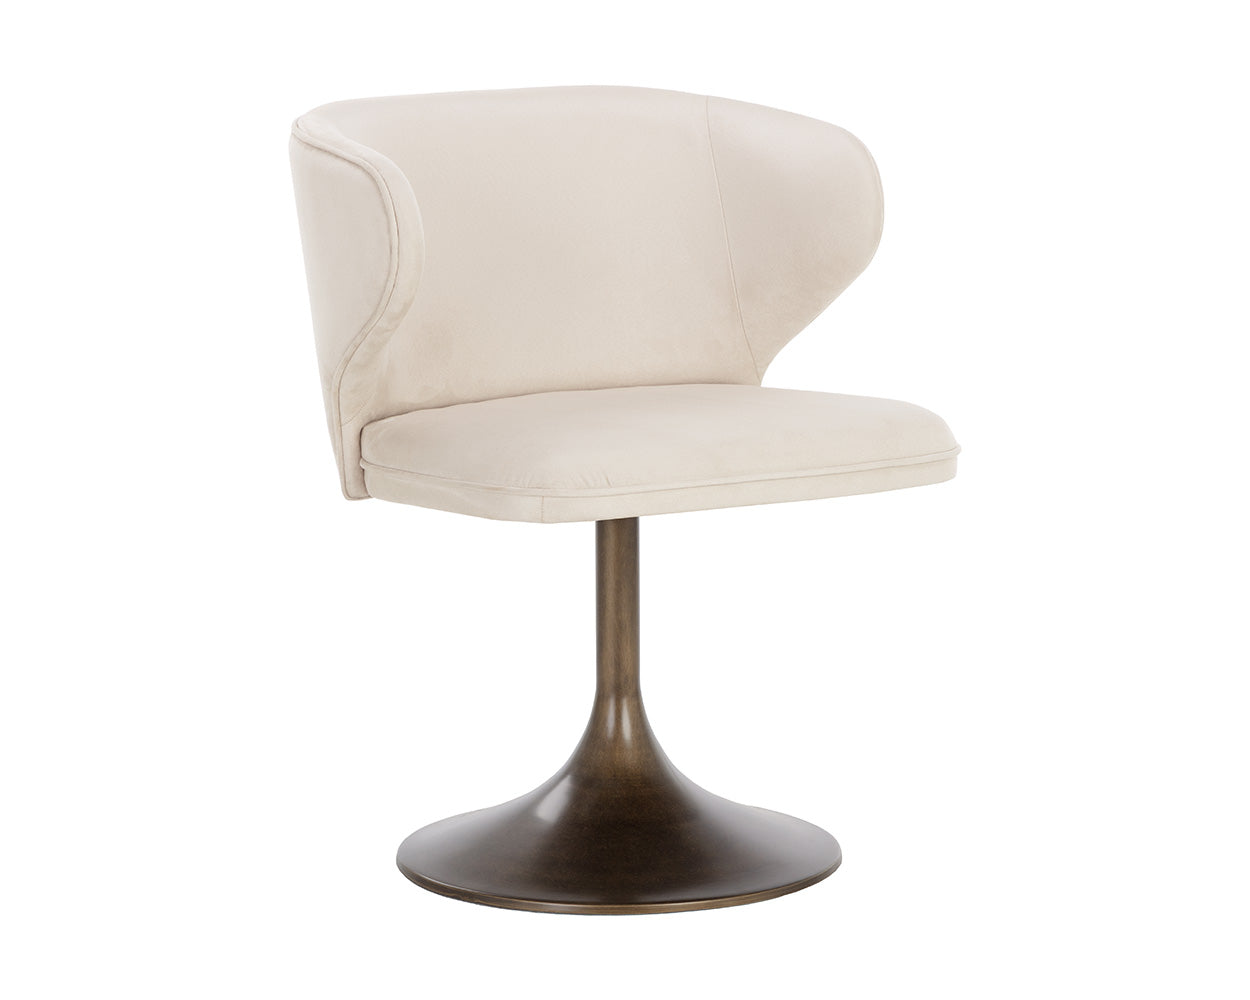 Picture of Simone Swivel Dining Chair - Casablanca Cloud